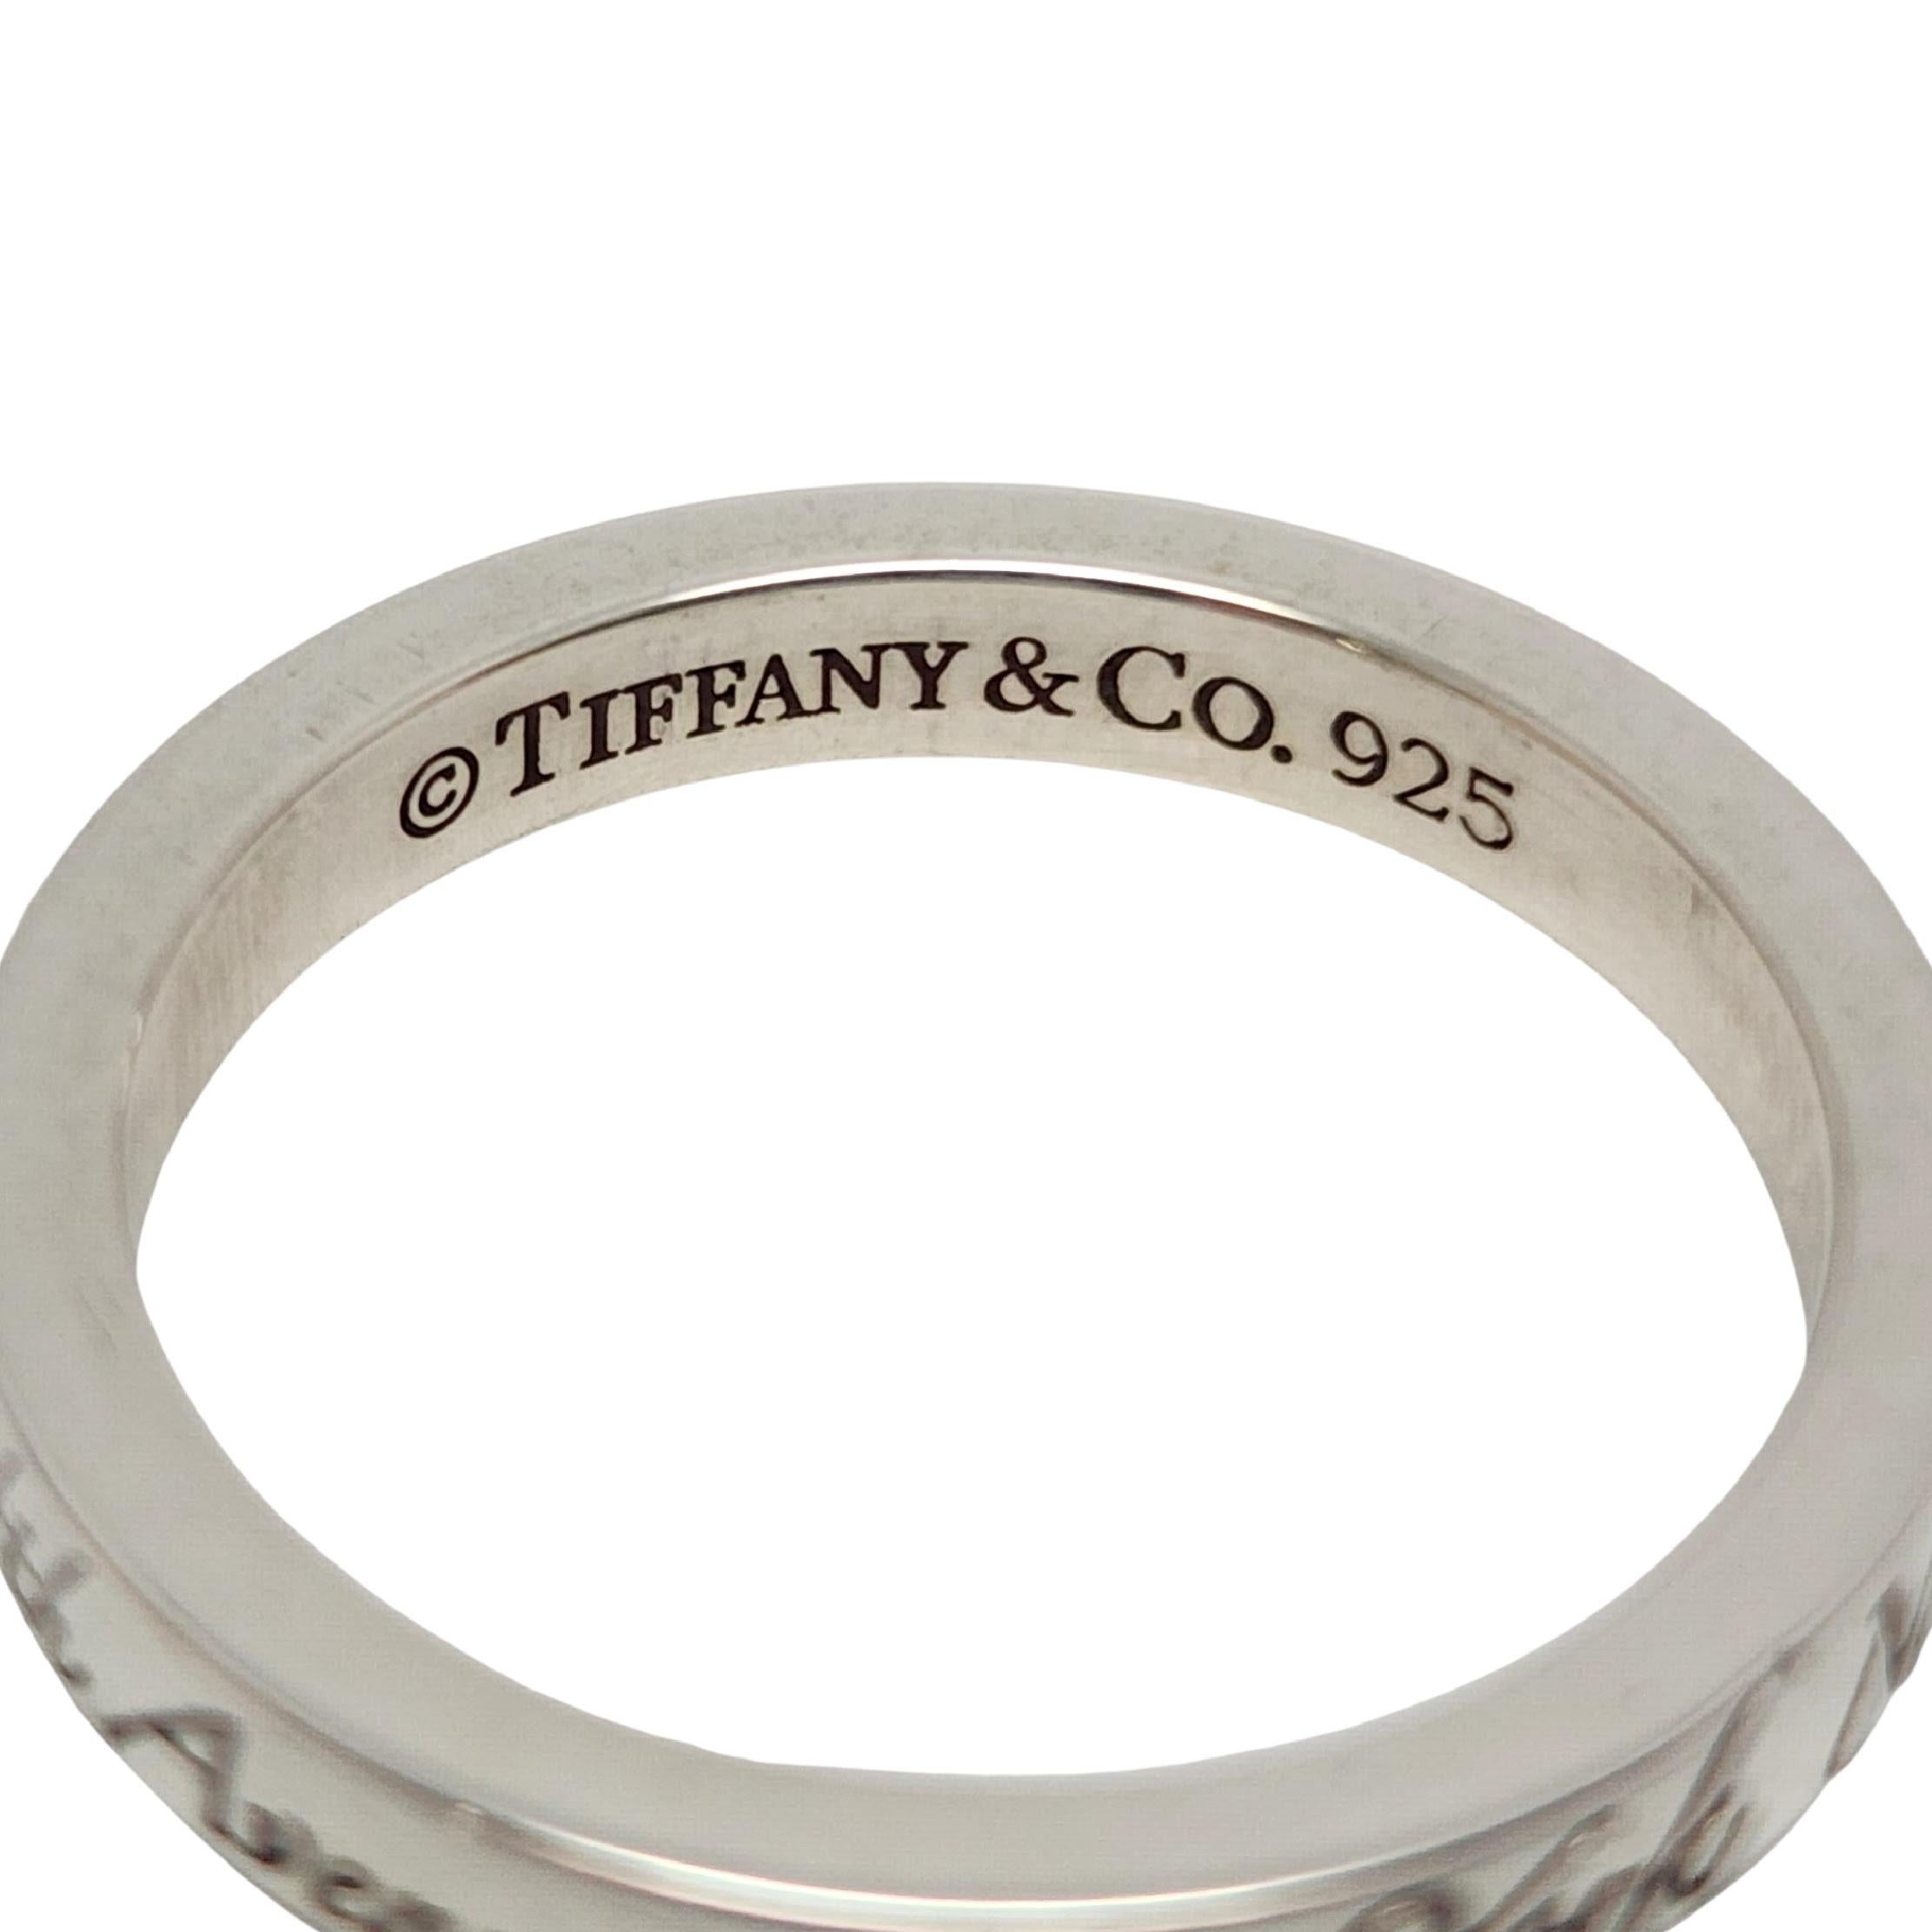 Tiffany & Co New York Address Notes Narrow Band Ring Taille 5,25 n°13007 en vente 3